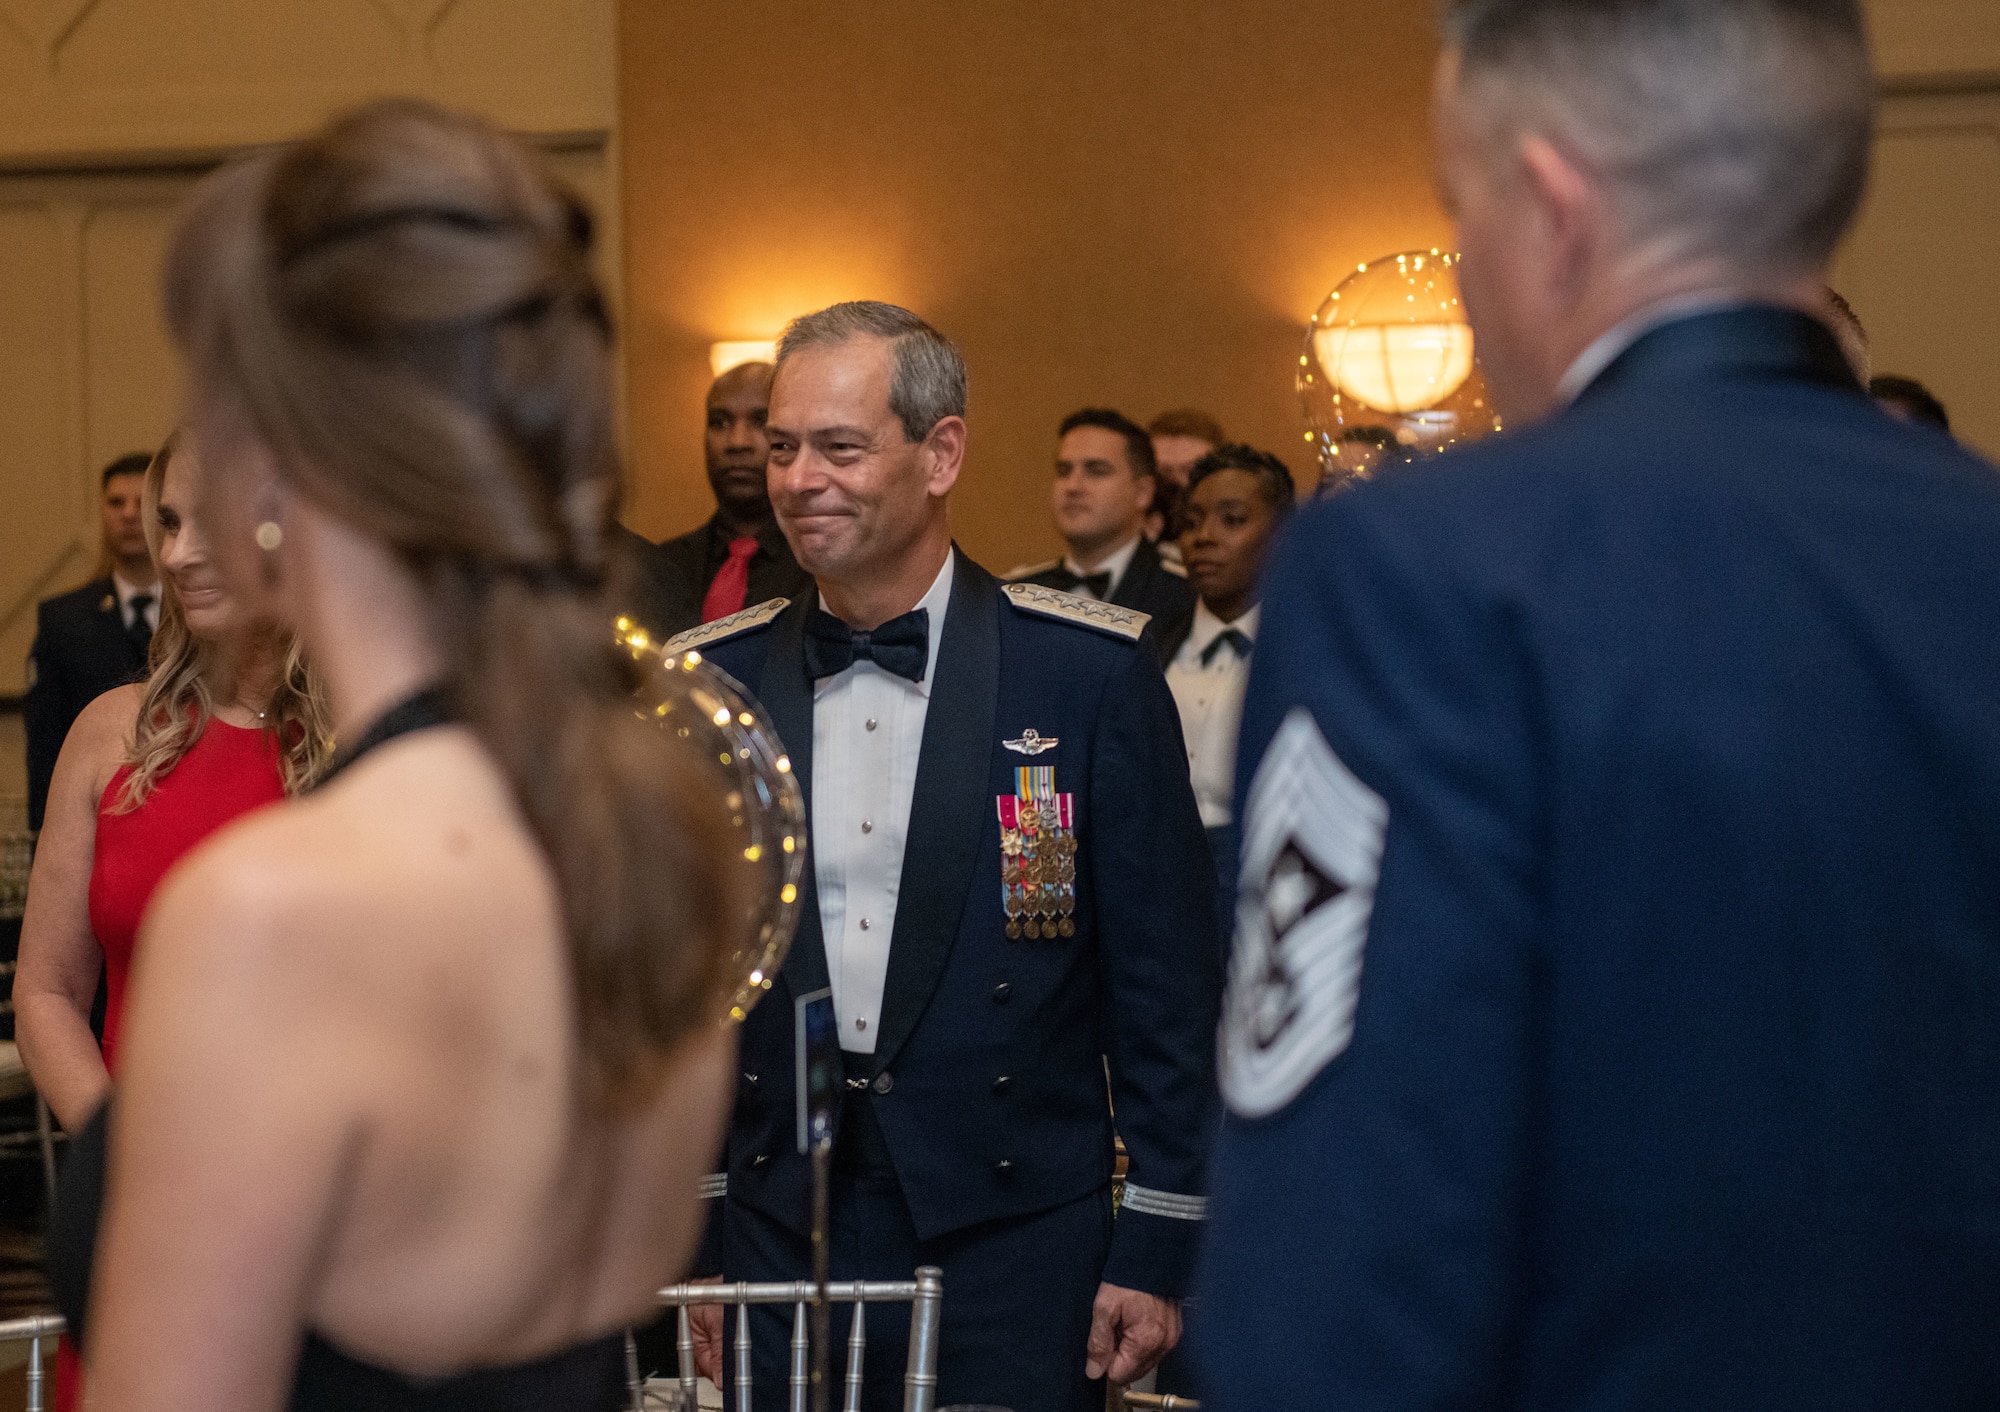 U.S. Air Force Gen. Ken Wilsbach, Pacific Air Forces commander, enters the ballroom at the Wigwam Resort for the 75th Air Force Ball near Luke Air Force Base, Arizona on Sept. 24, 2022.